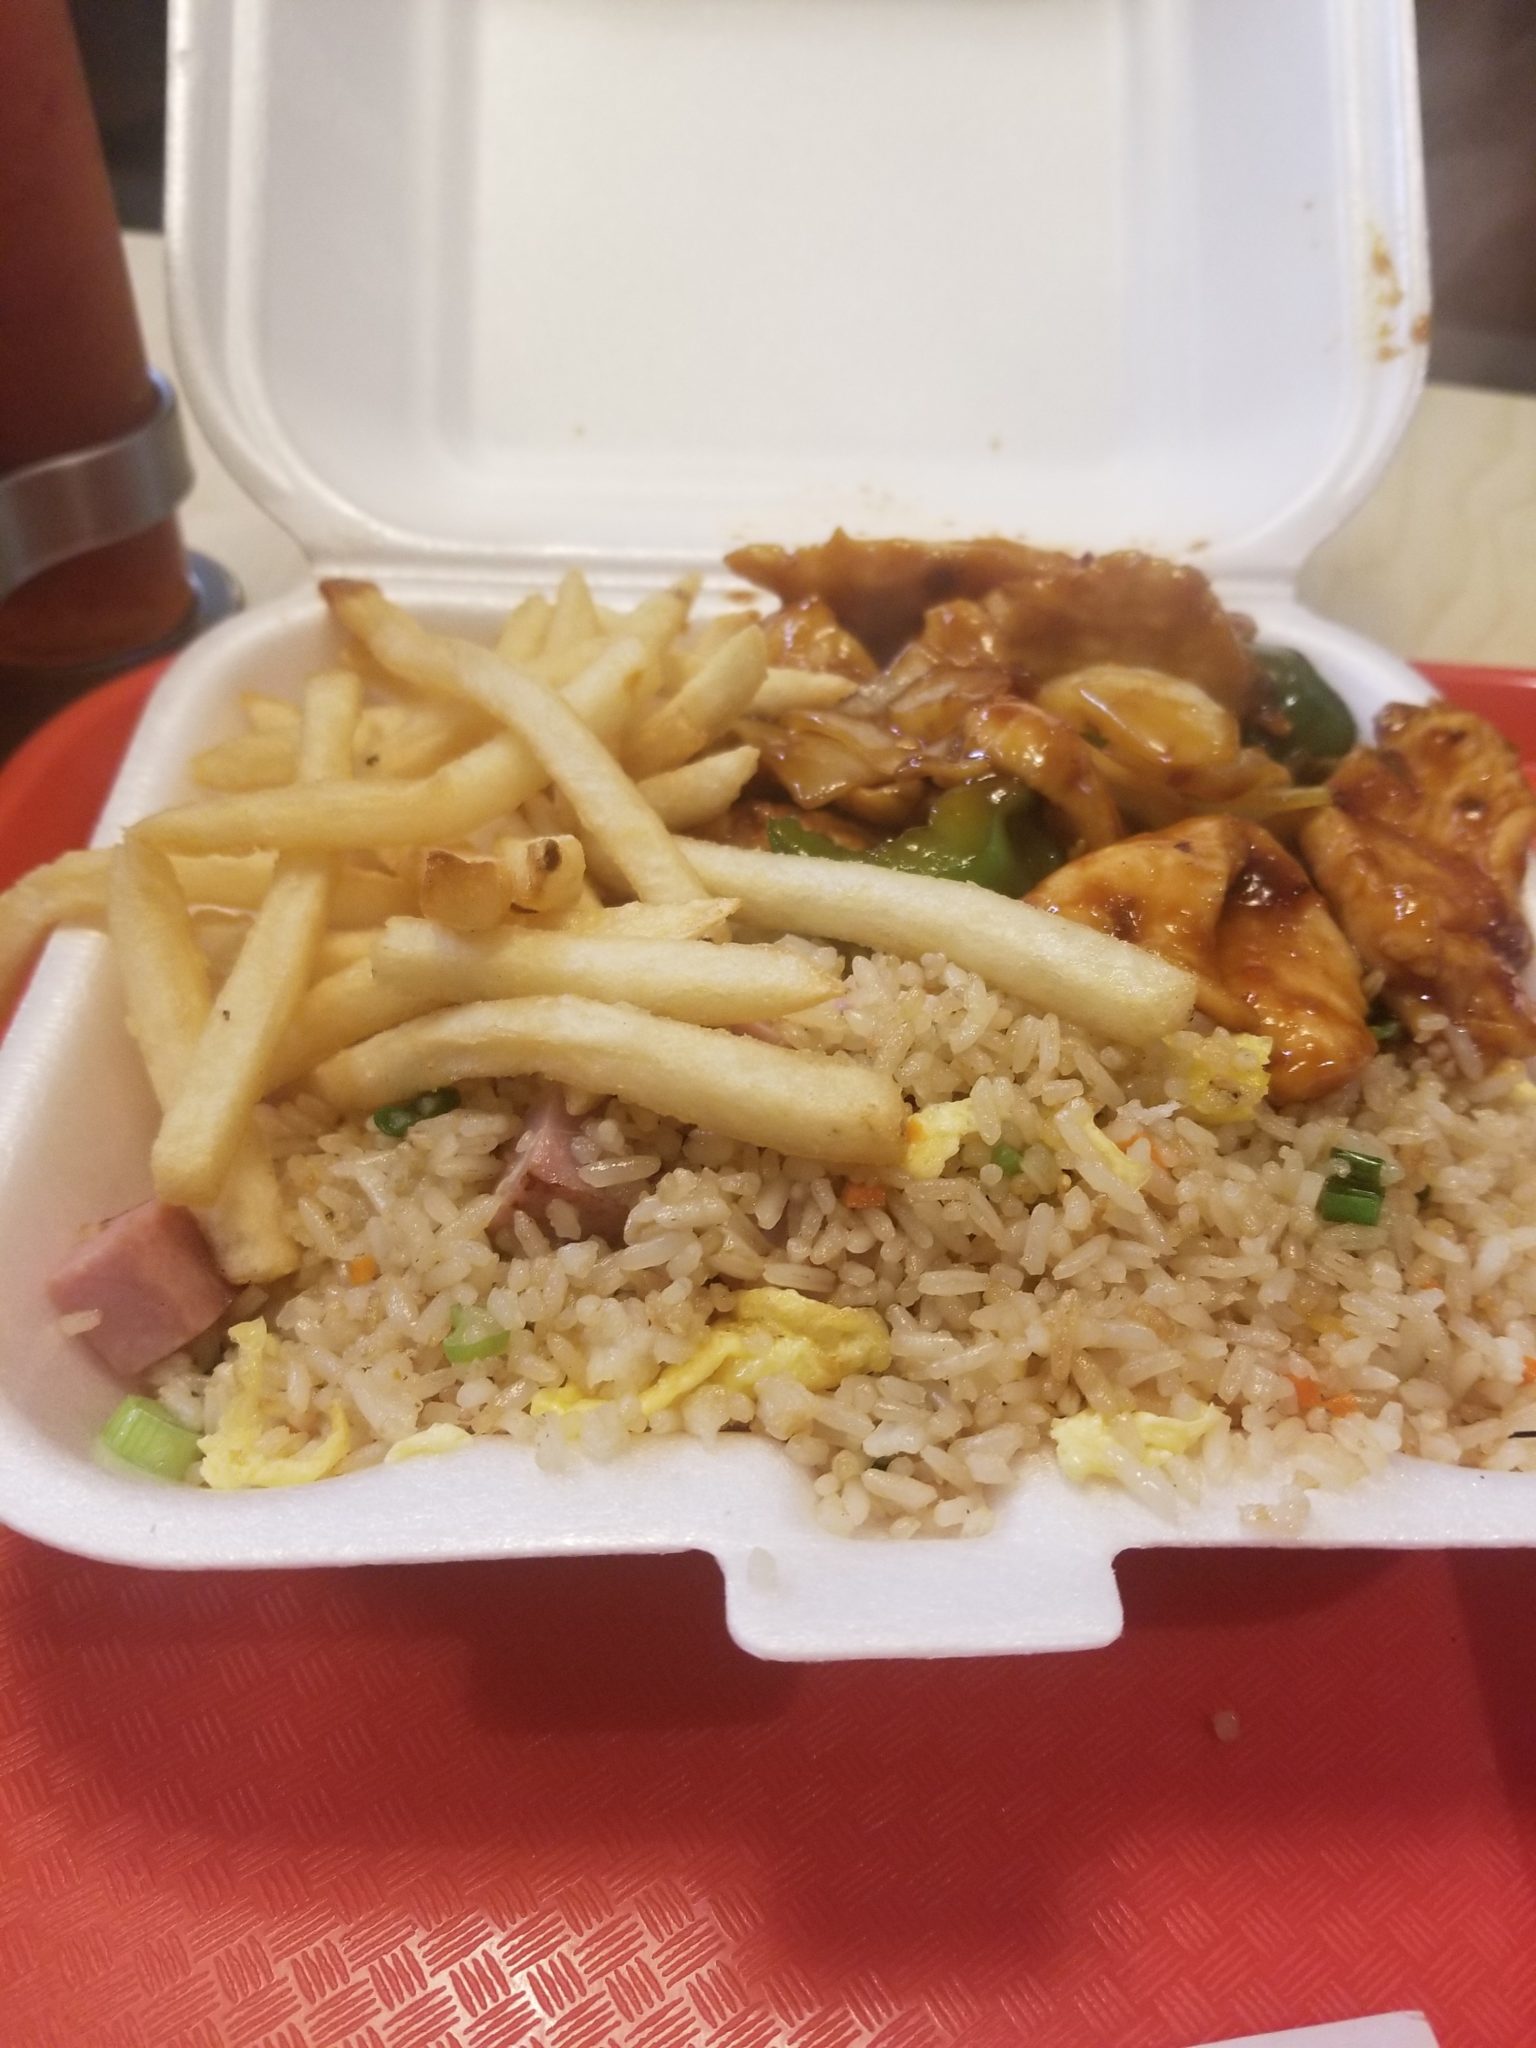 a styrofoam container with a meal